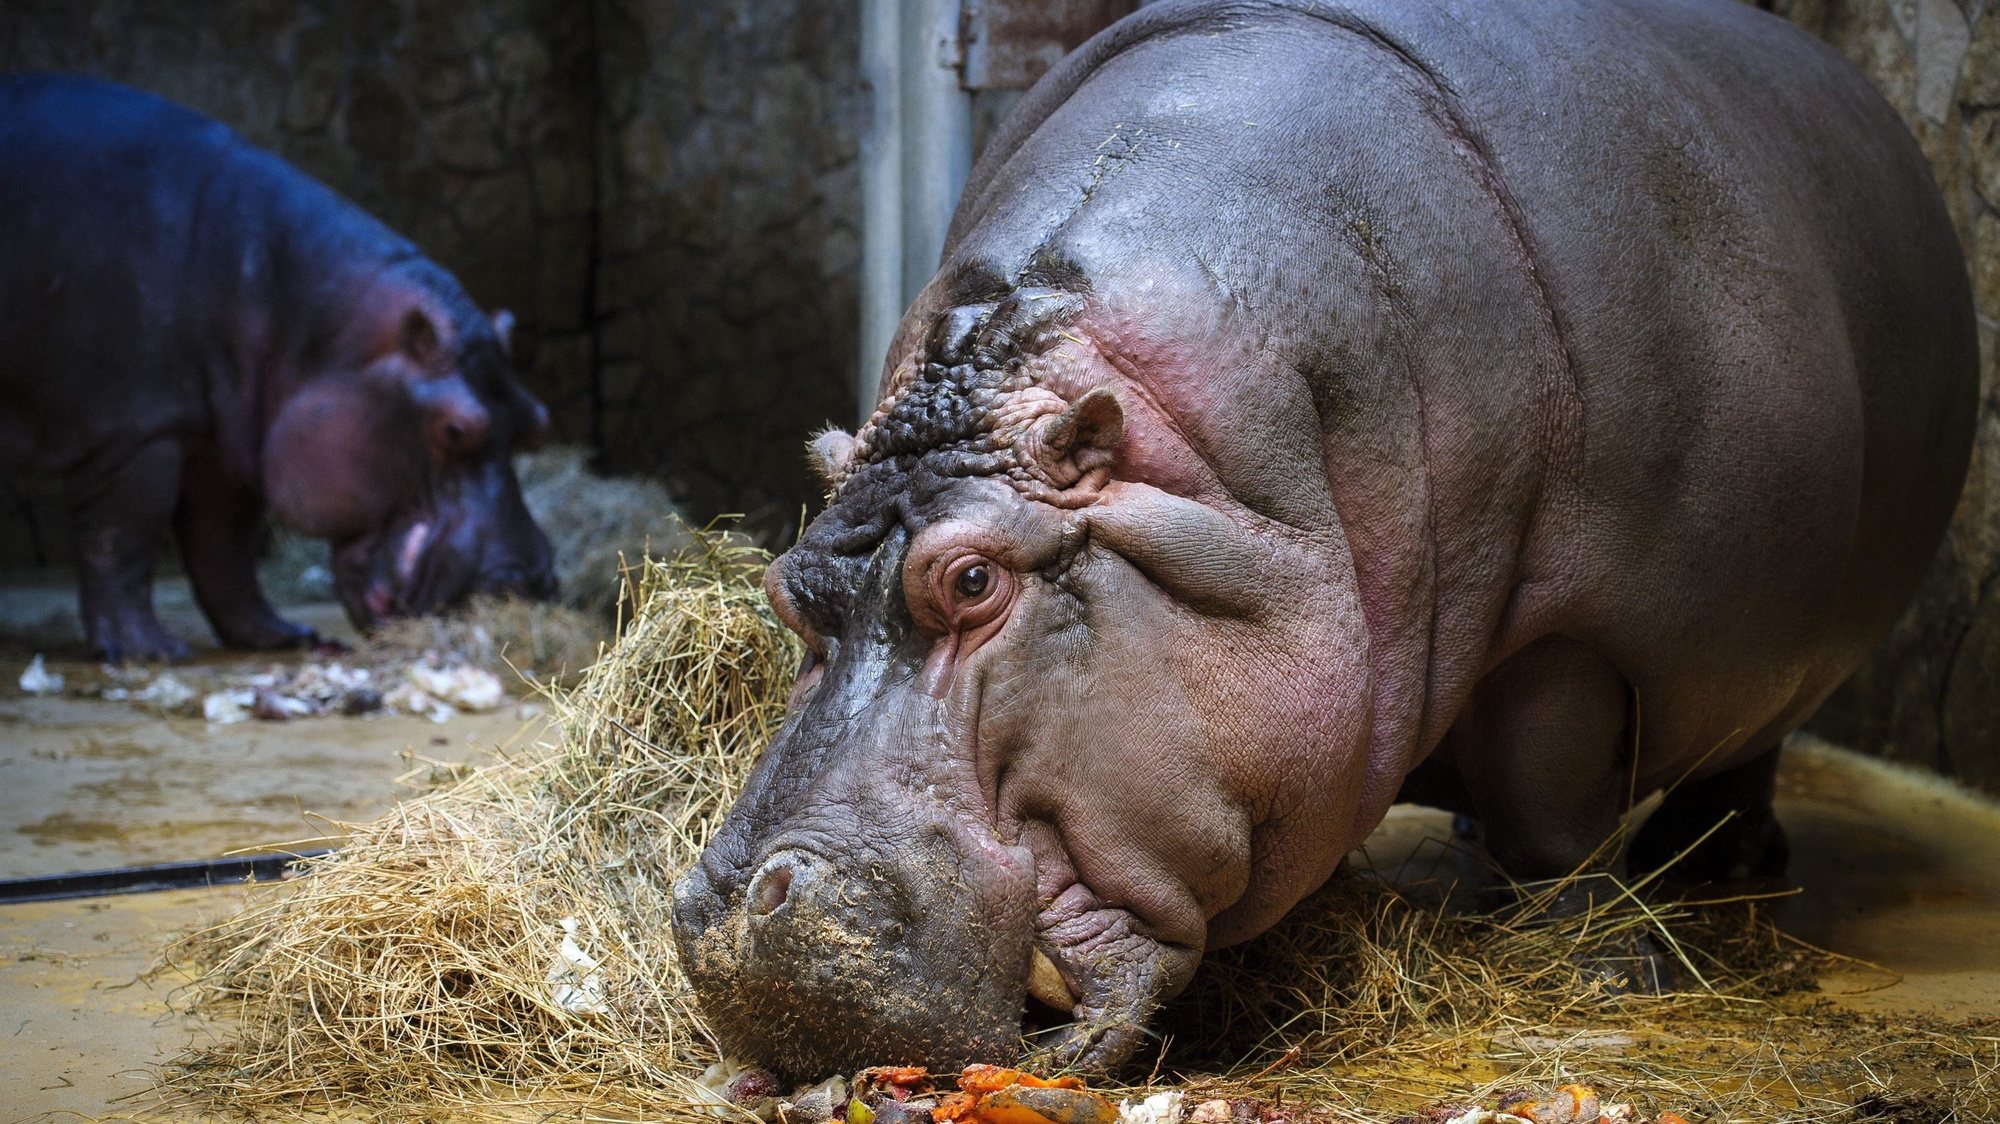 epa05689521 A hippopotamus eats vegetables and fruits it received on the occasion of Christmas in the Debrecen Zoological and Botanical Garden, in Debrecen, 226 kms east of Budapest, Hungary, 27 December 2016.  EPA/ZSOLT CZEGLEDI HUNGARY OUT